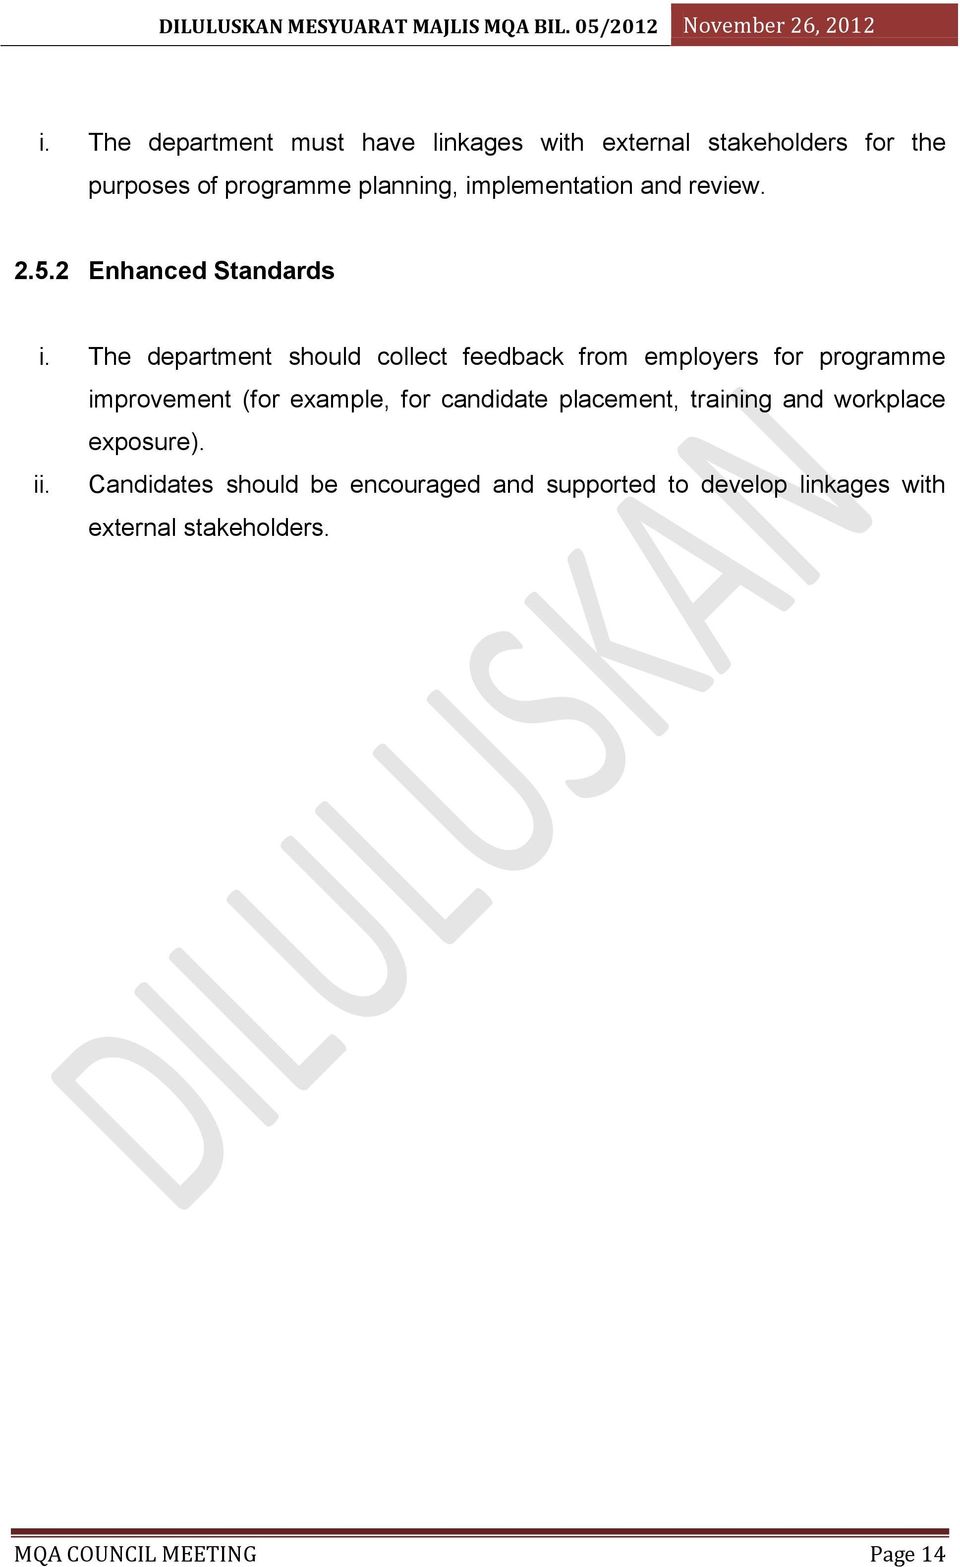 The department should collect feedback from employers for programme improvement (for example, for candidate